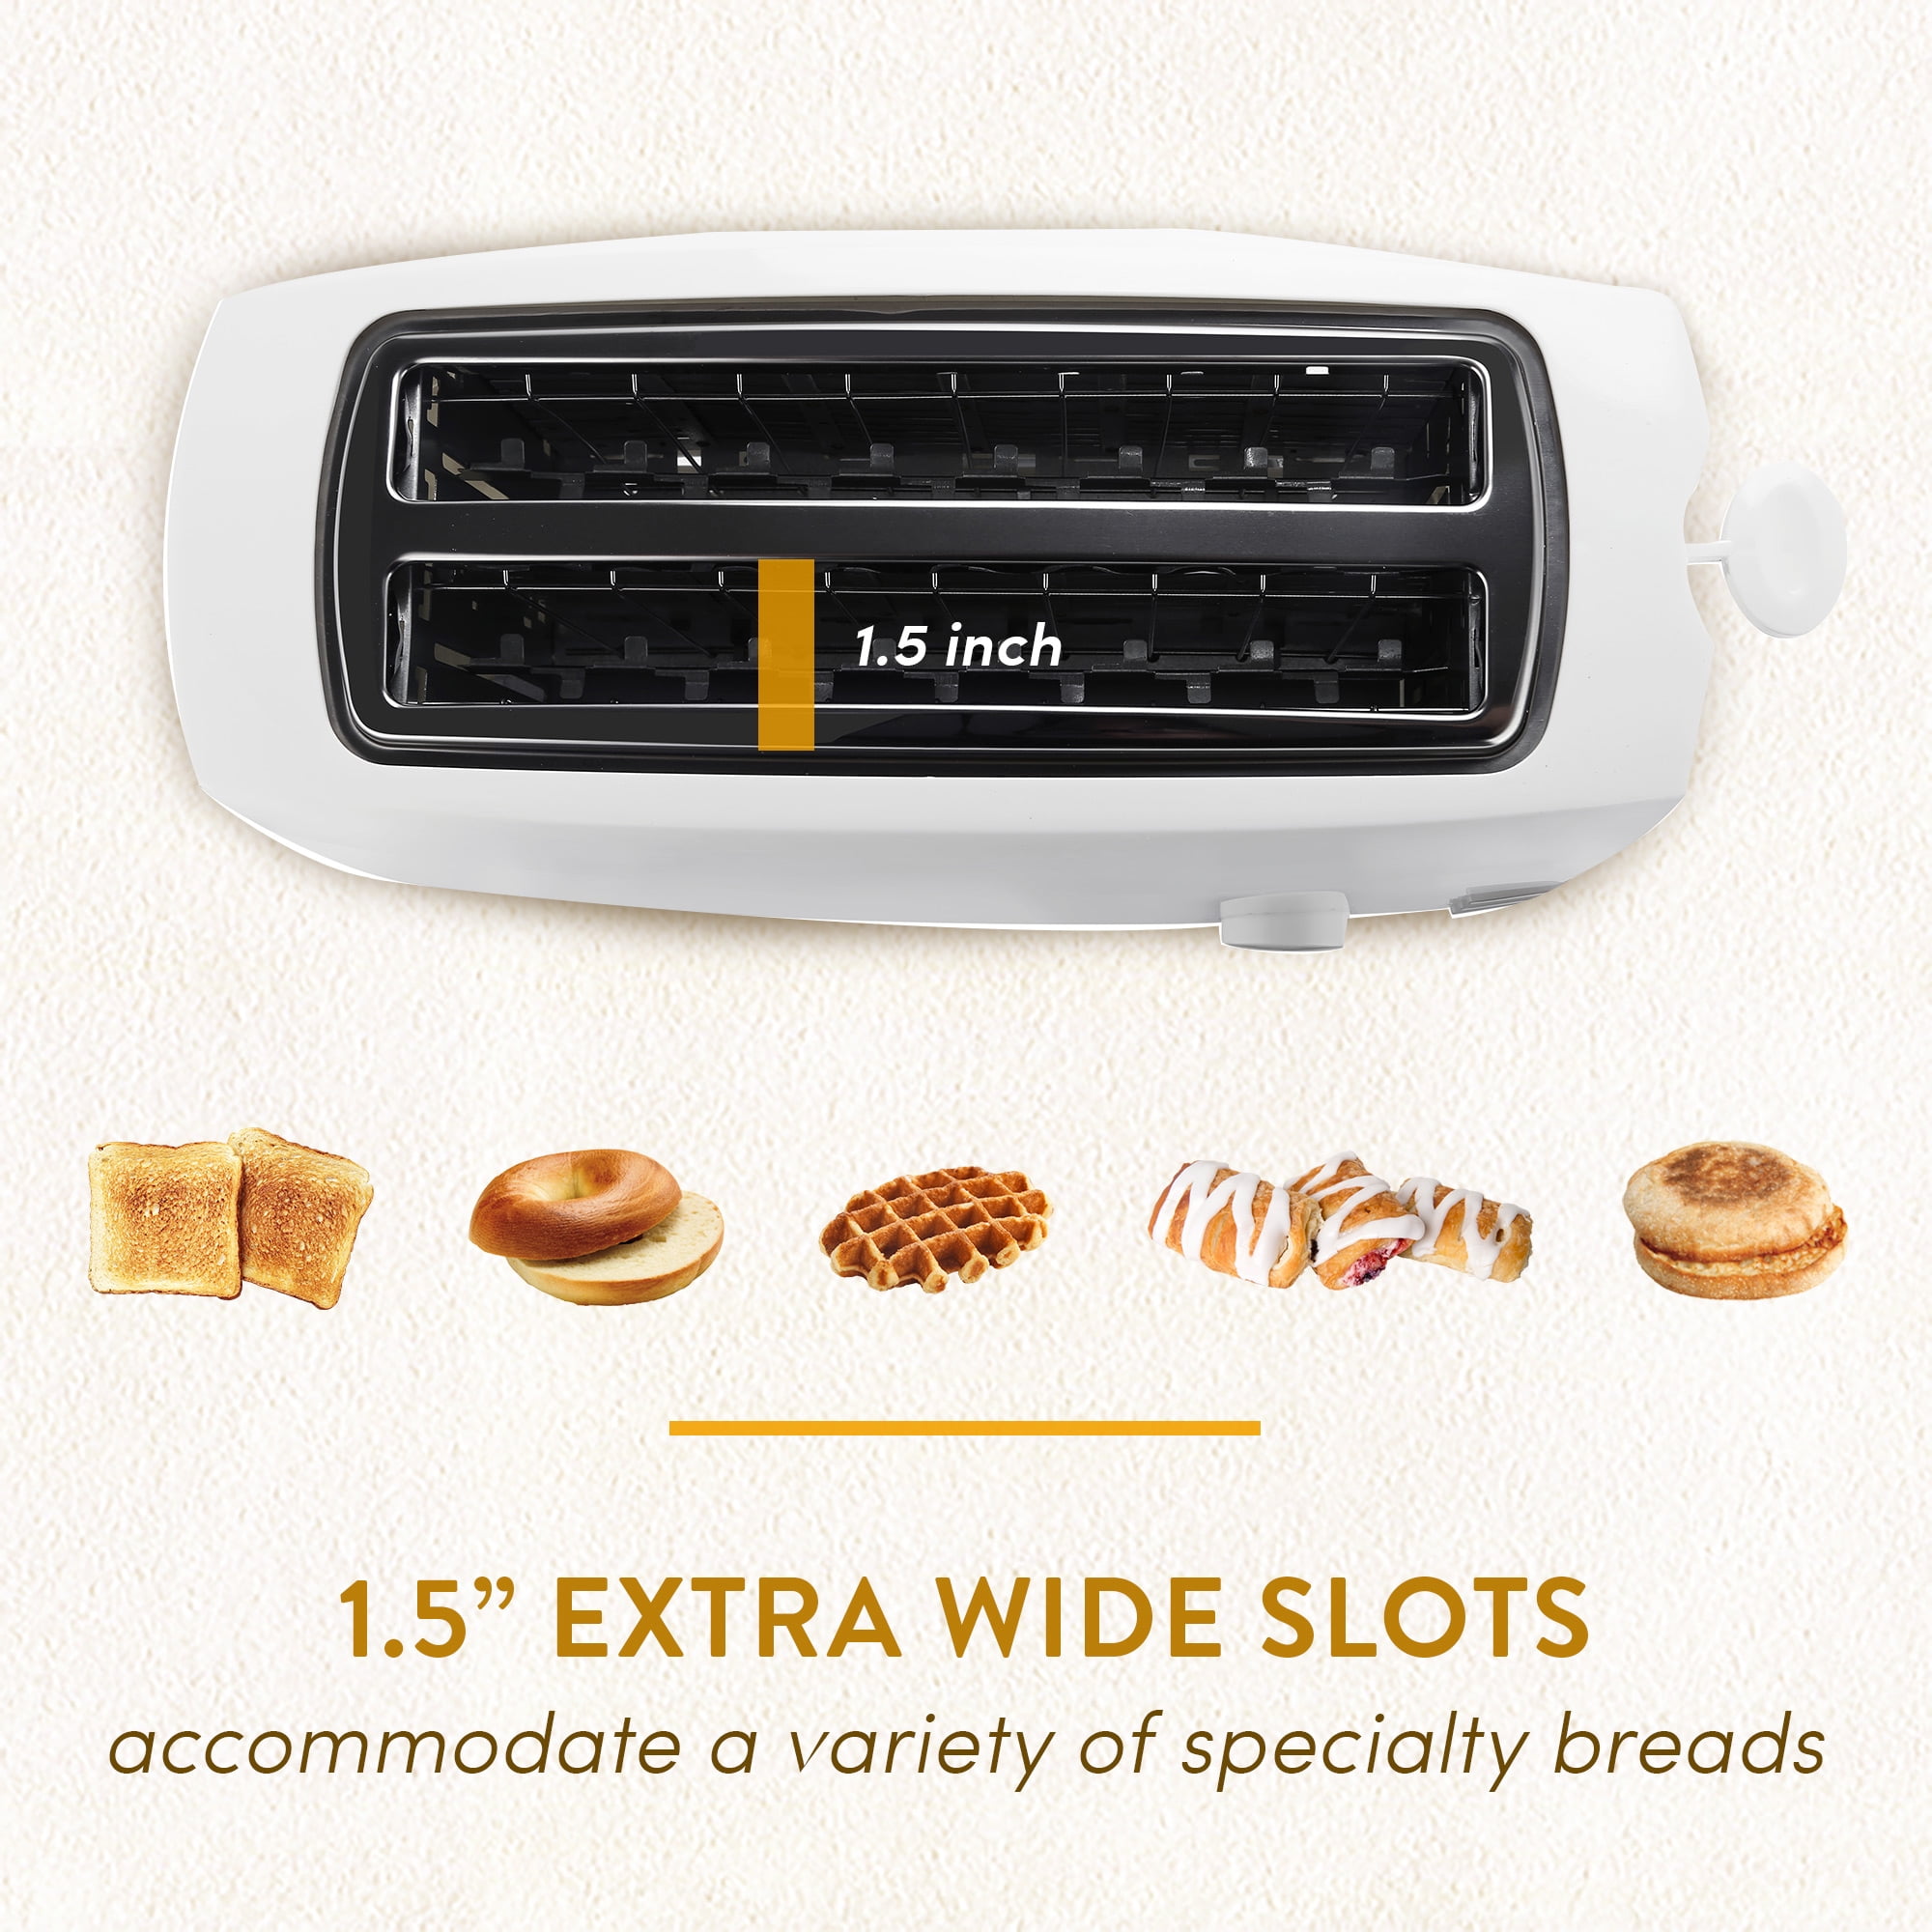 Elite Gourmet ECT-4829 Long Slot 4 Slice Toaster, 6 Toast Settings Toaster  Defrost, Reheat, Cancel Functions, Slide Out Crumb Tray, Extra Wide Slots